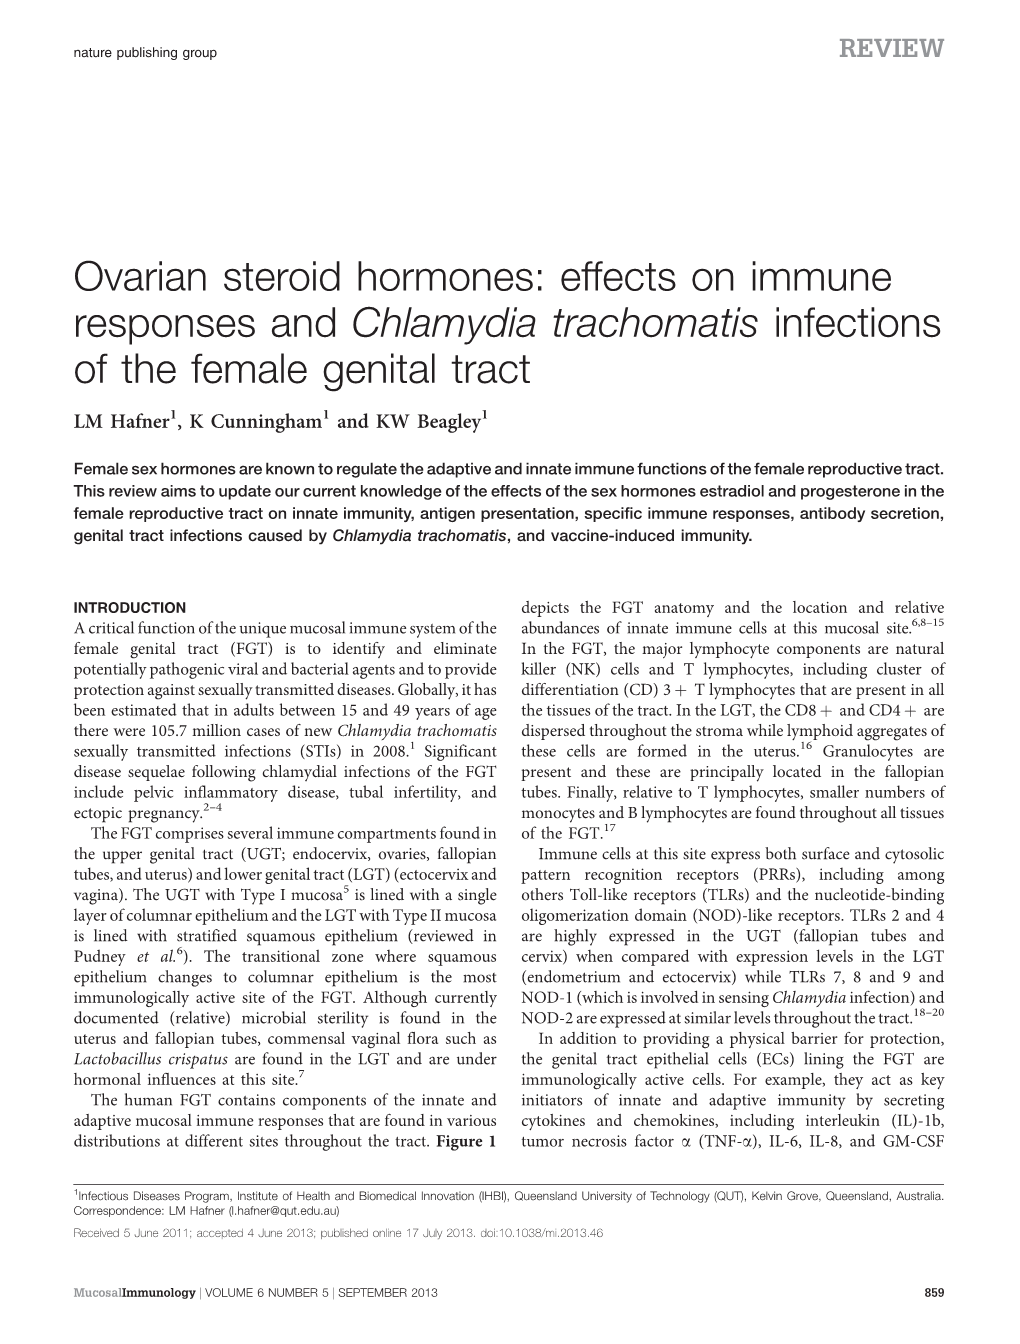 Ovarian Steroid Hormones: Effects on Immune Responses and Chlamydia Trachomatis Infections of the Female Genital Tract